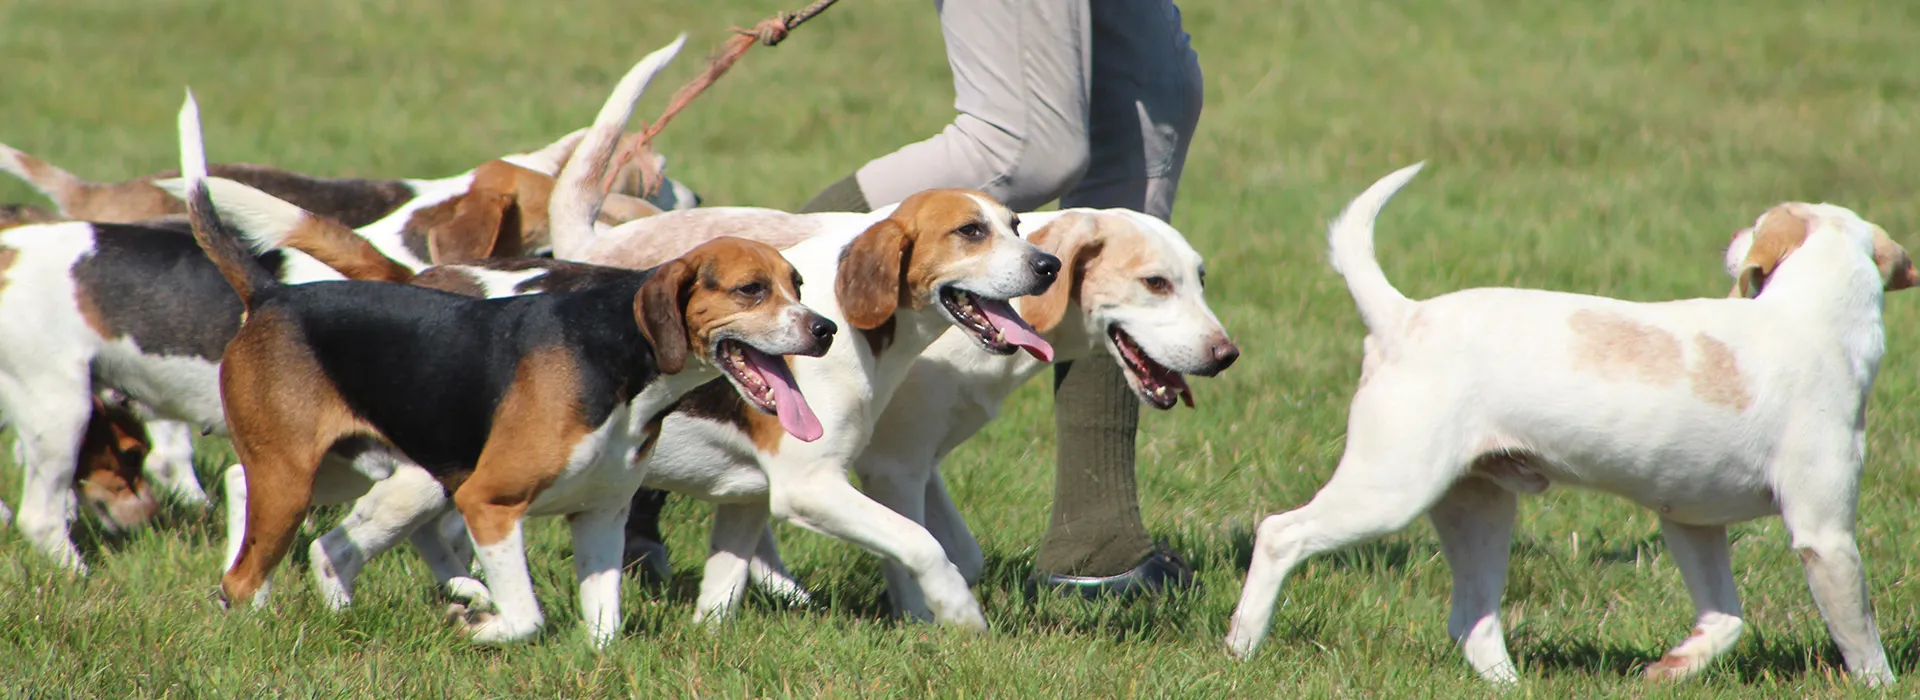 Foxhounds, staghounds, minkhounds, beagles, harriers, Old English hounds